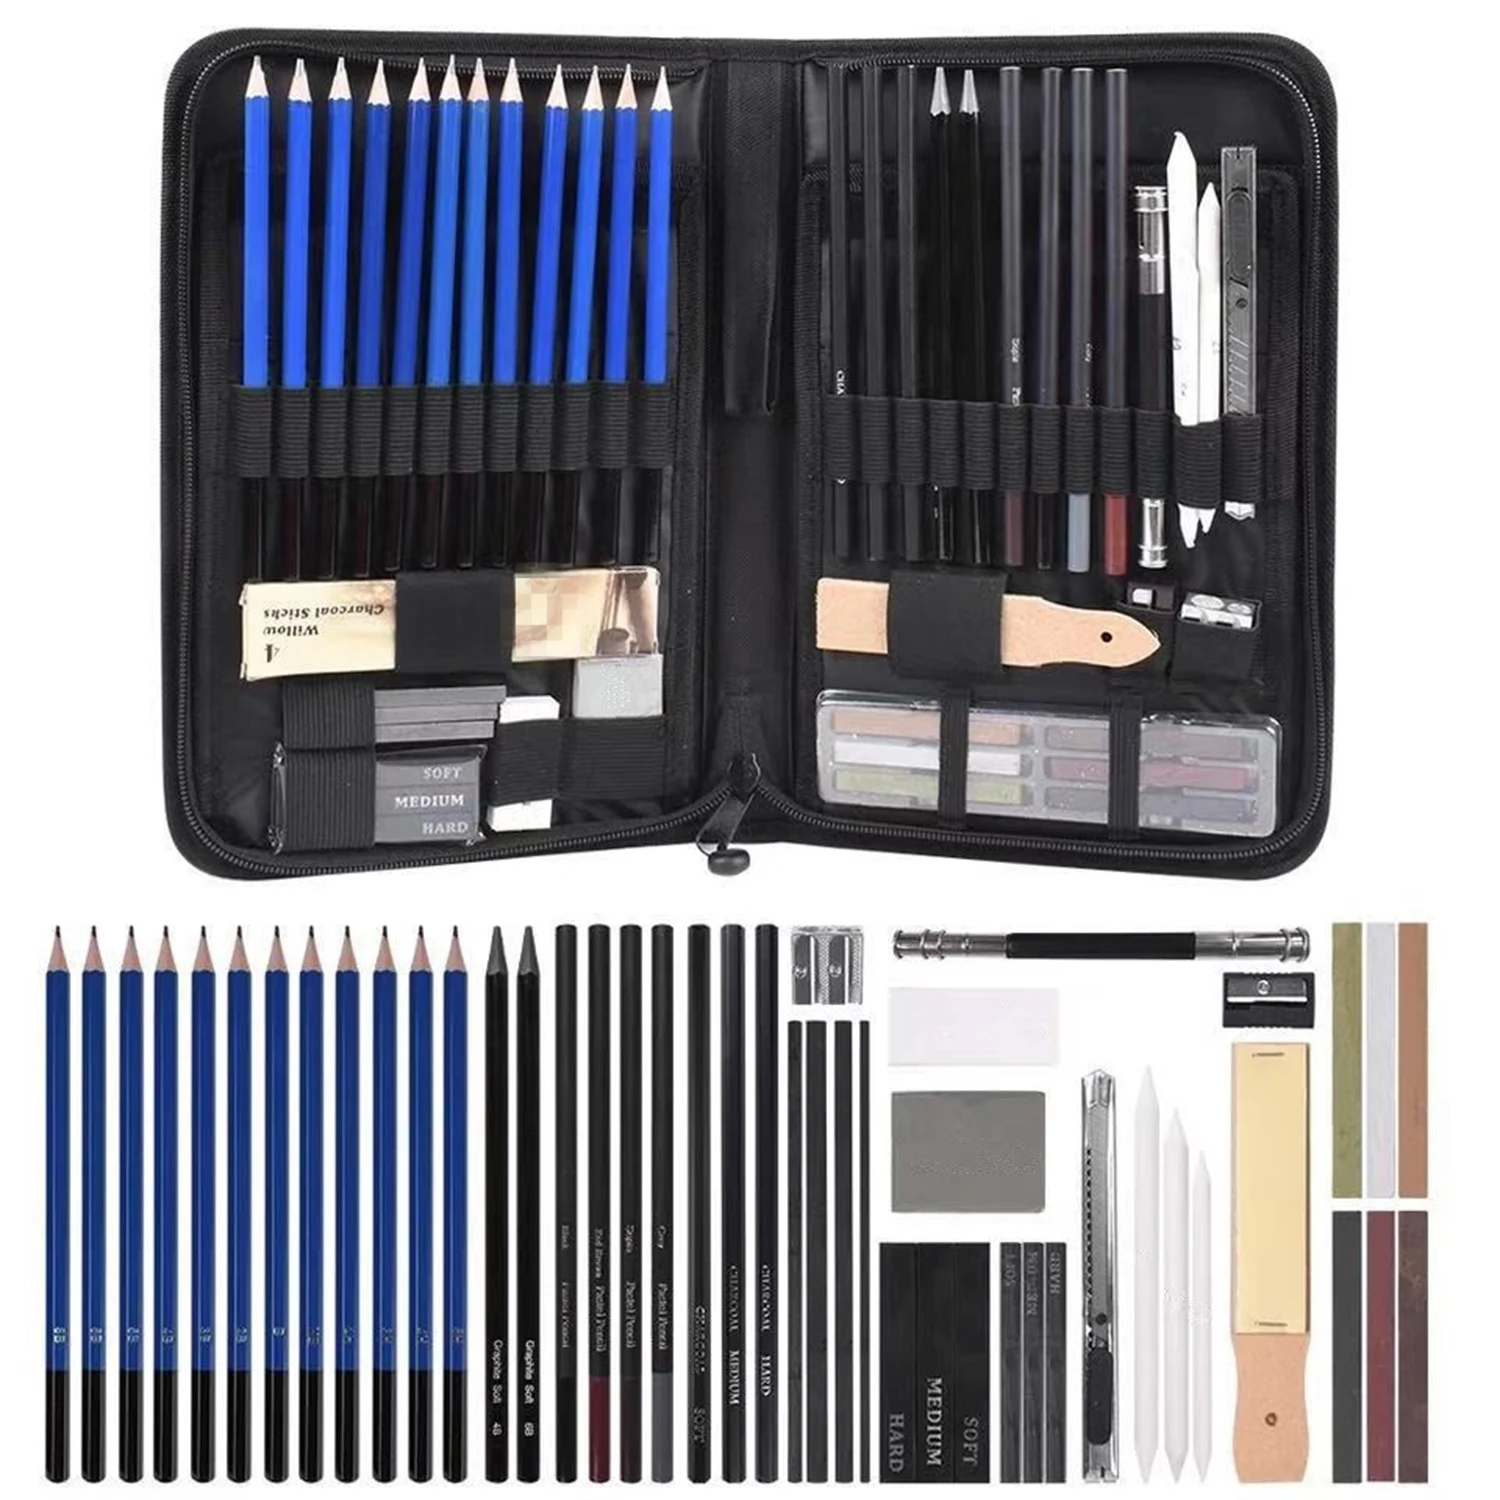 

48 pcs Drawing Pencils Kit Sketch Set,Artists Sketching Pencil Set for Adults Kids Teens Art Supplies Include Charcoal